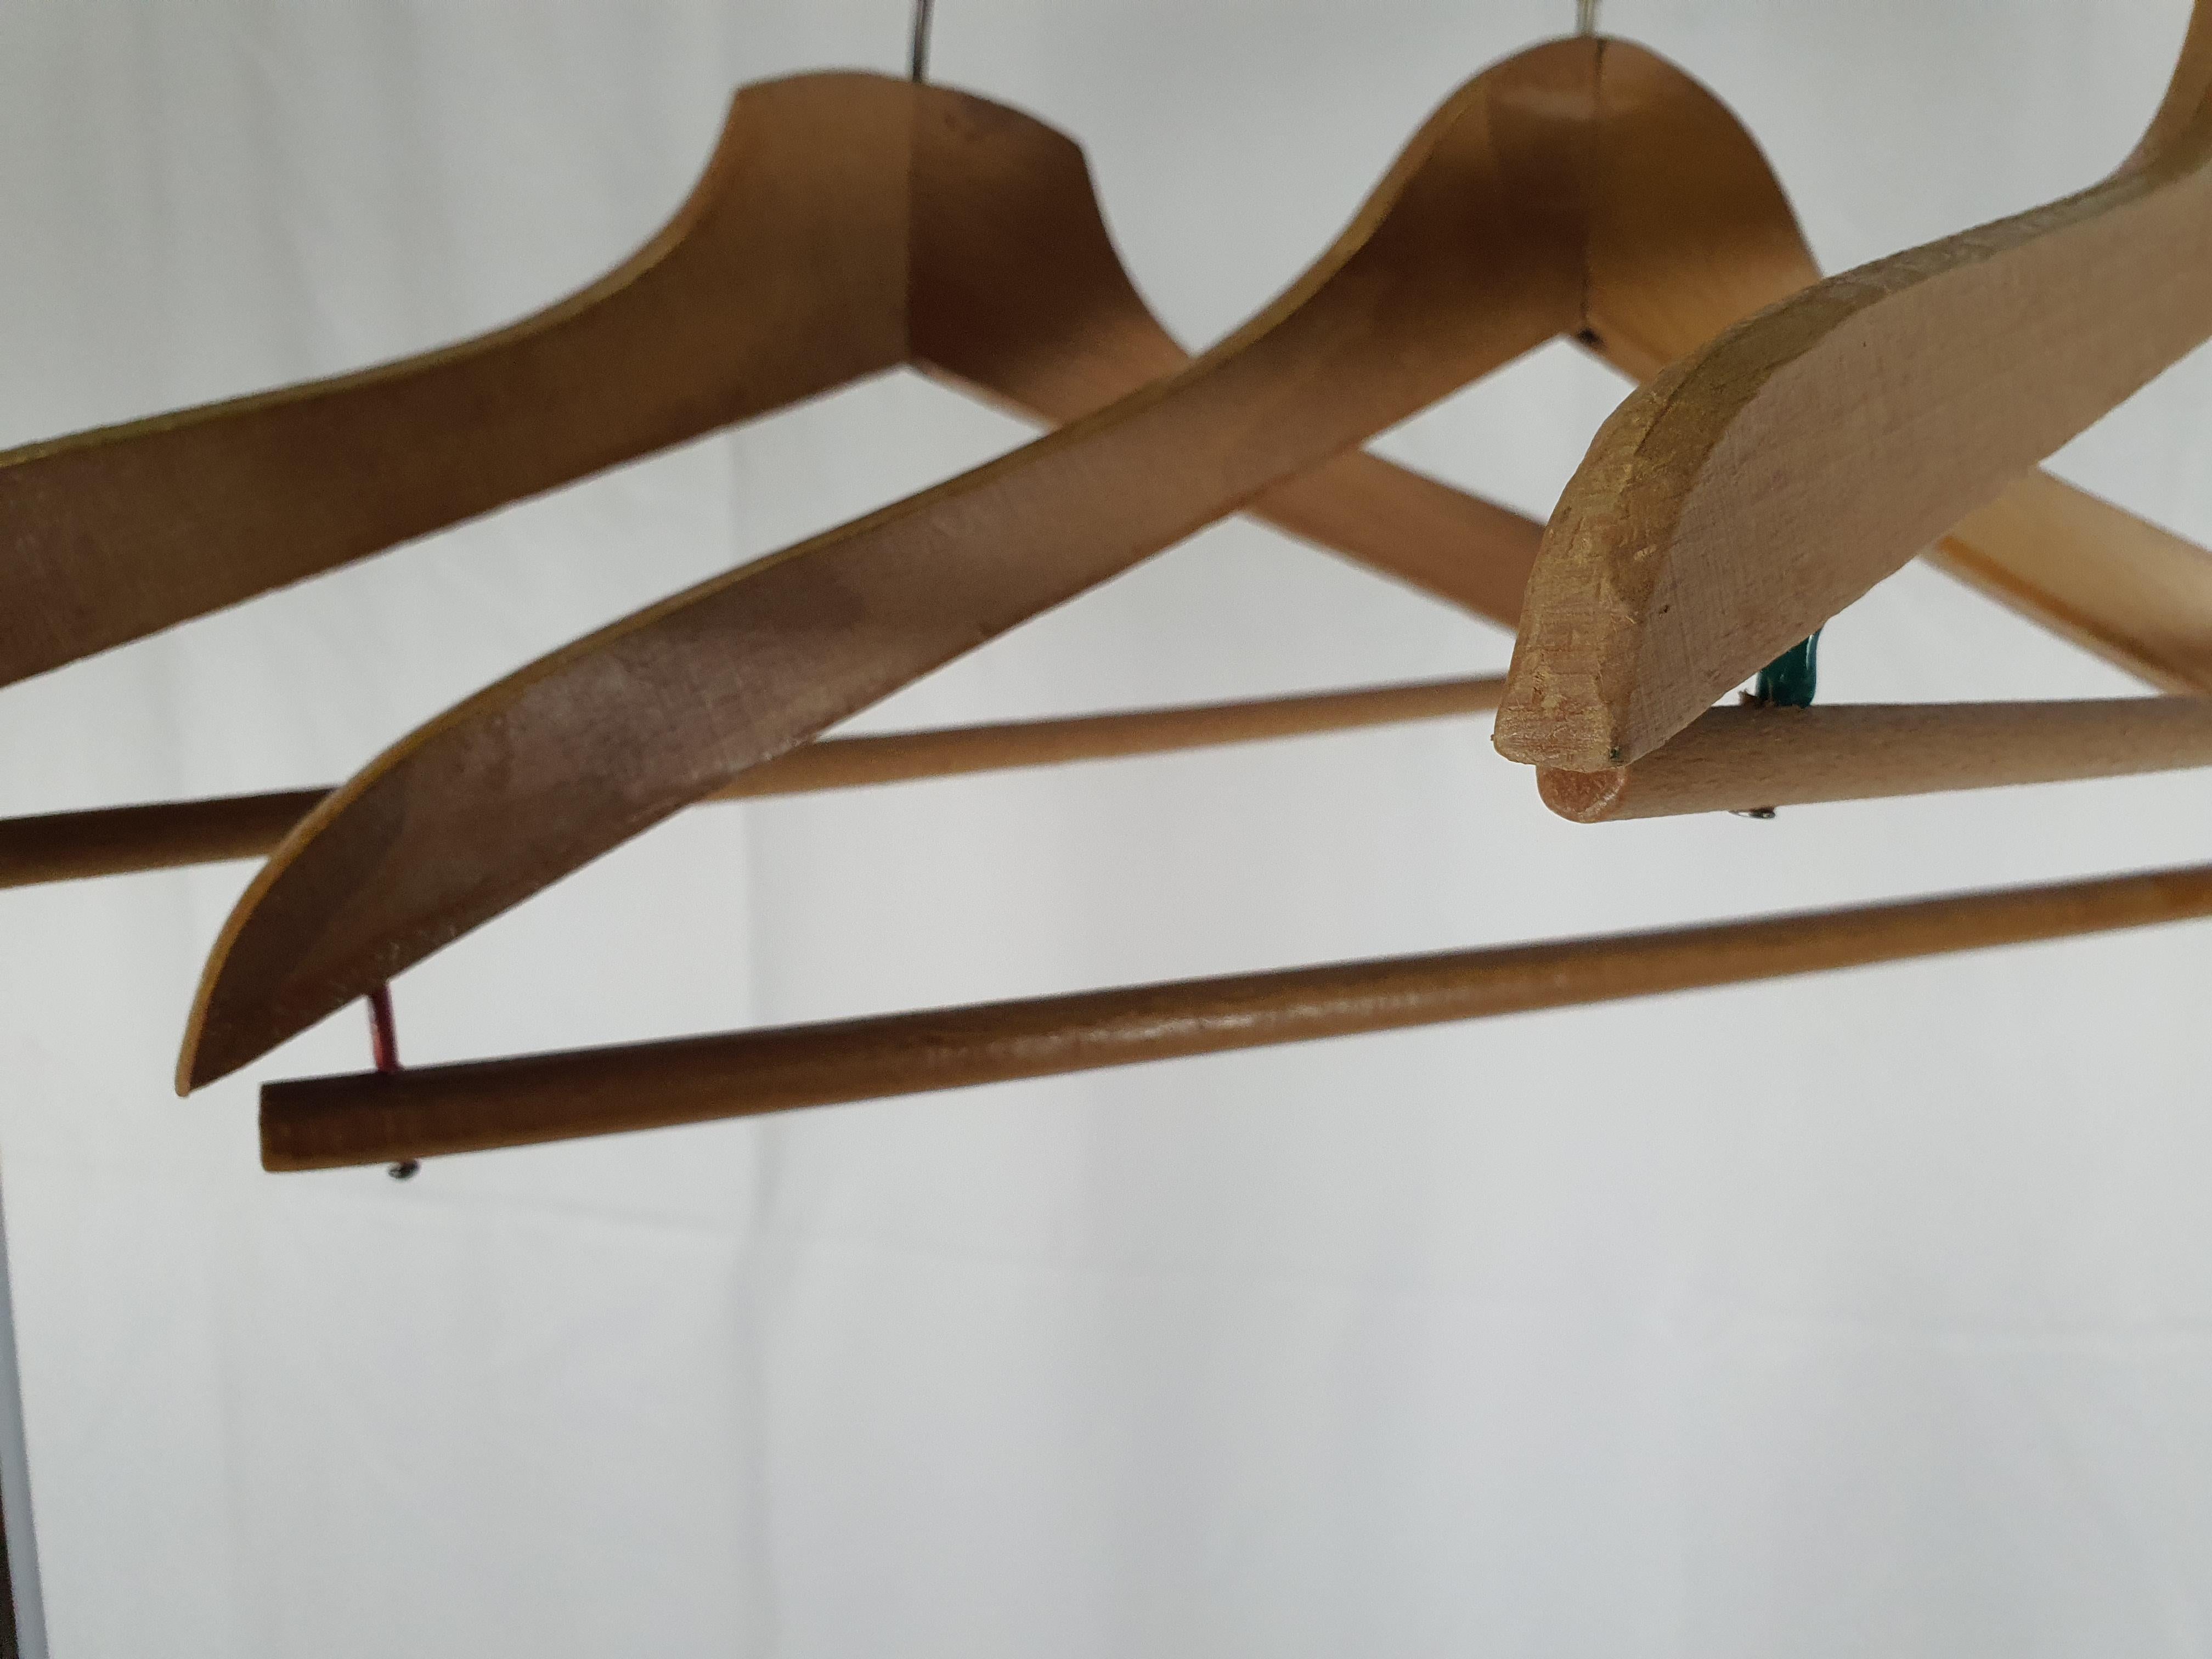 Set of 3 Vintage 1950s Hangers for Clothes In Good Condition For Sale In Premariacco, IT